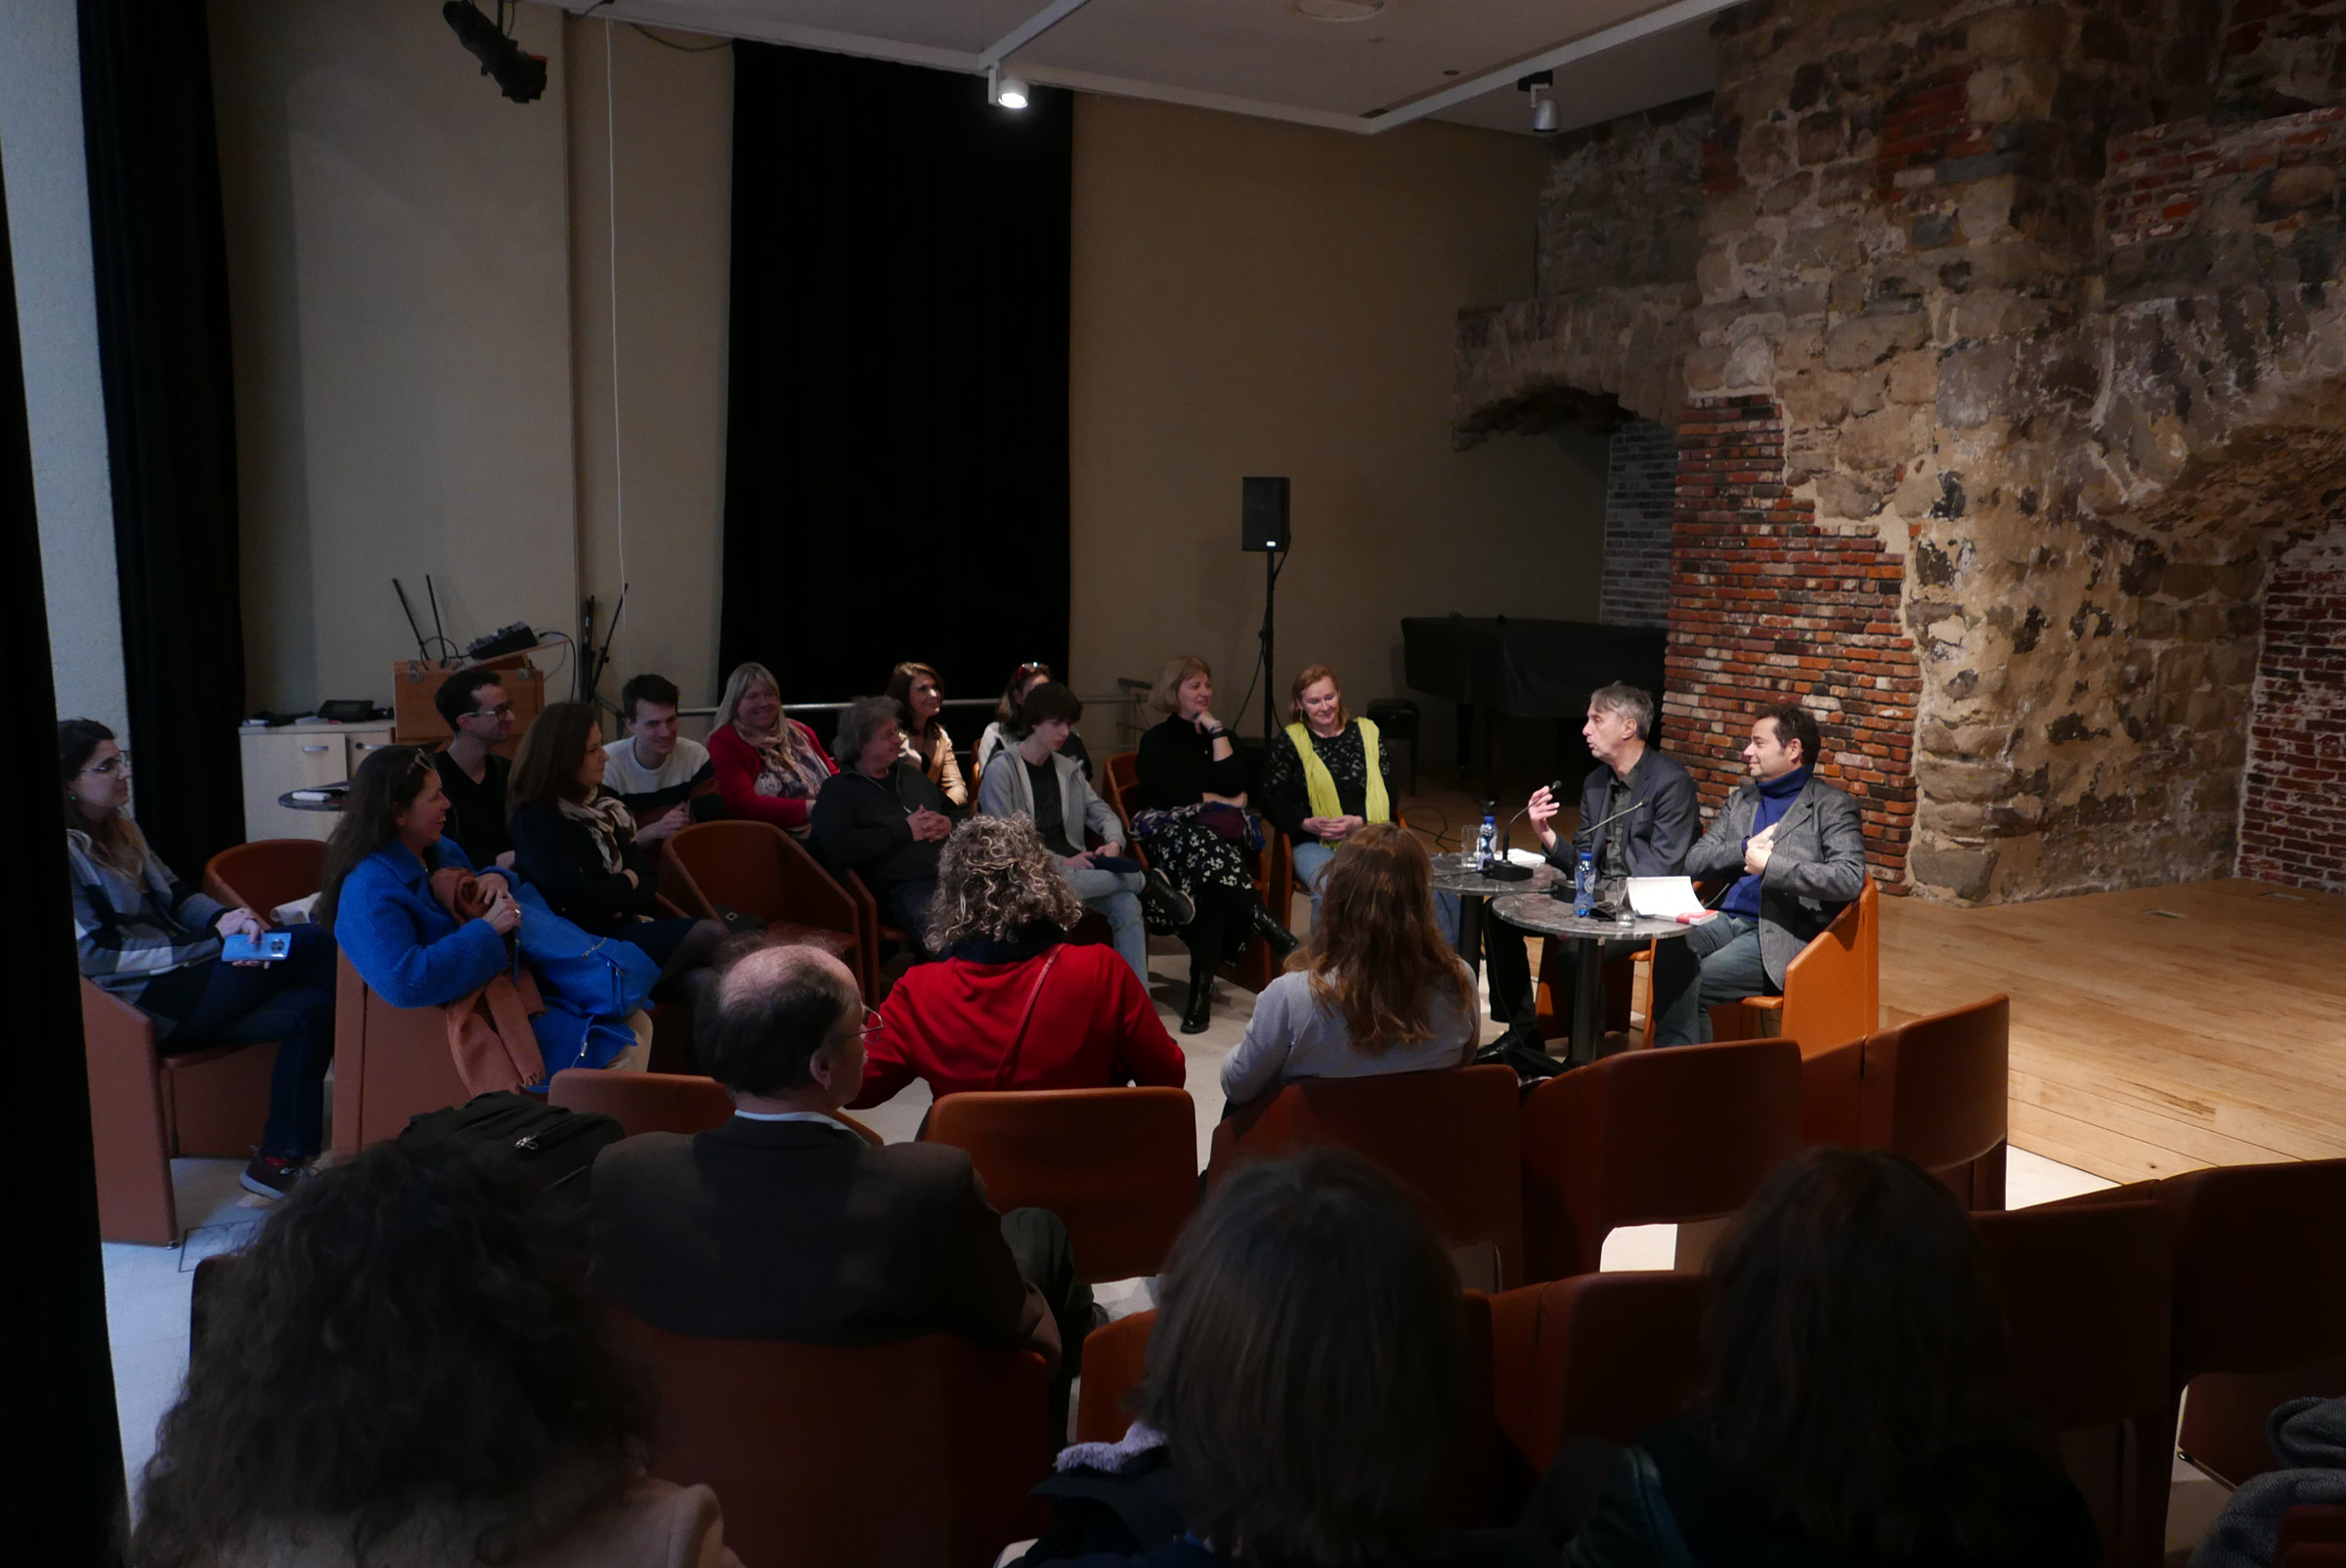 About writing, poetry and the Hungarian language – Poetry evening with István Kemény and translator Guillaume Métayer